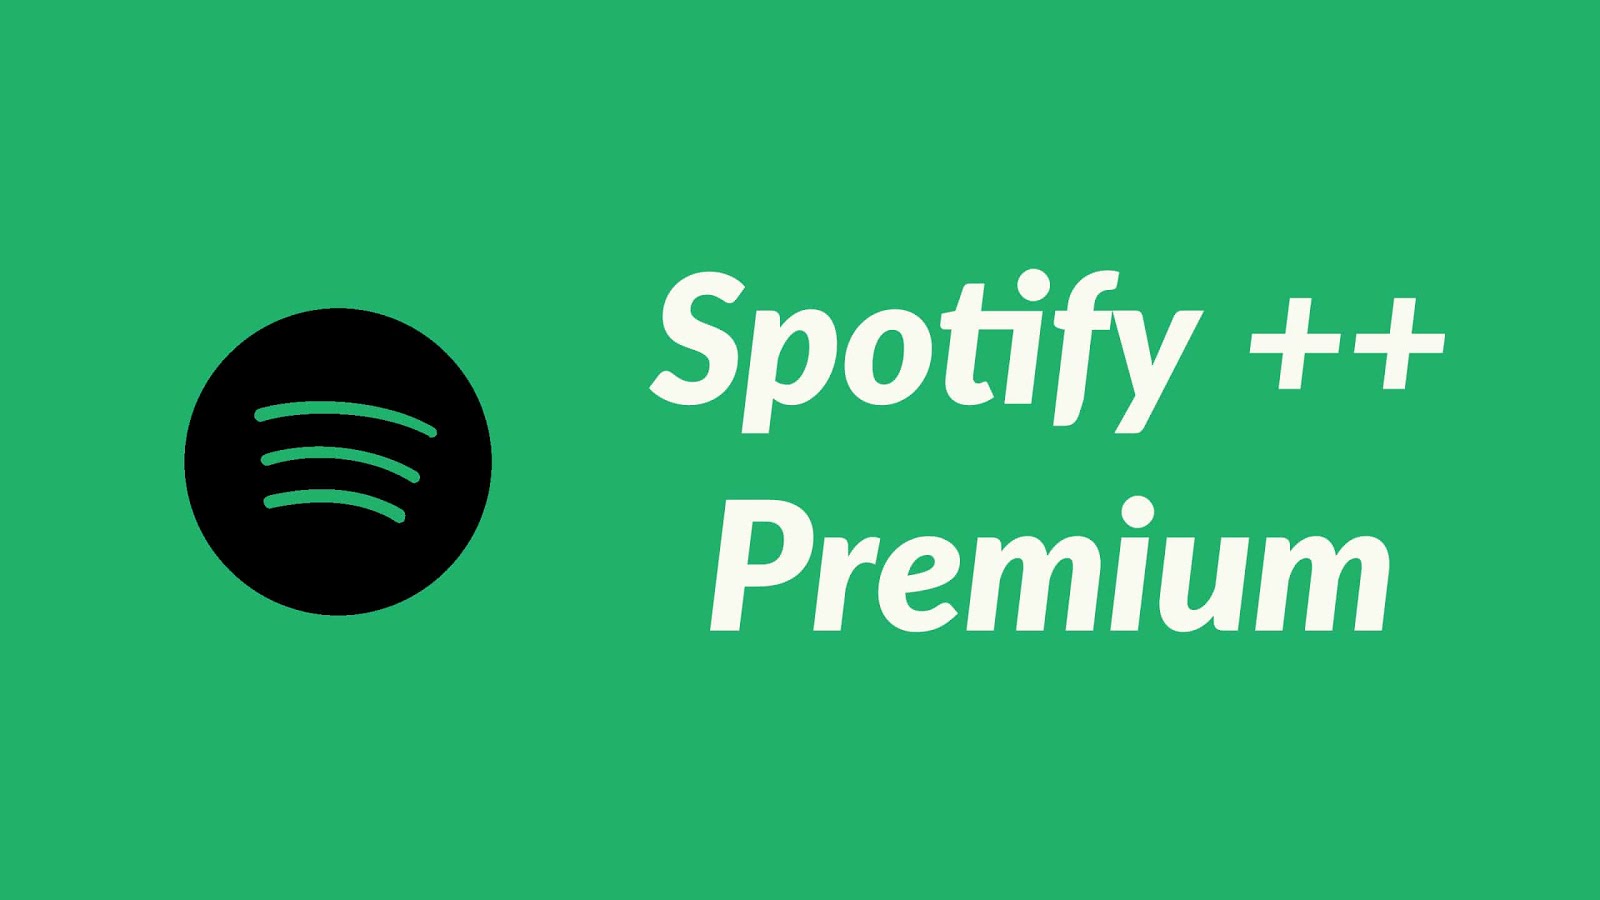 Spotify premium download to iphone 11 pro